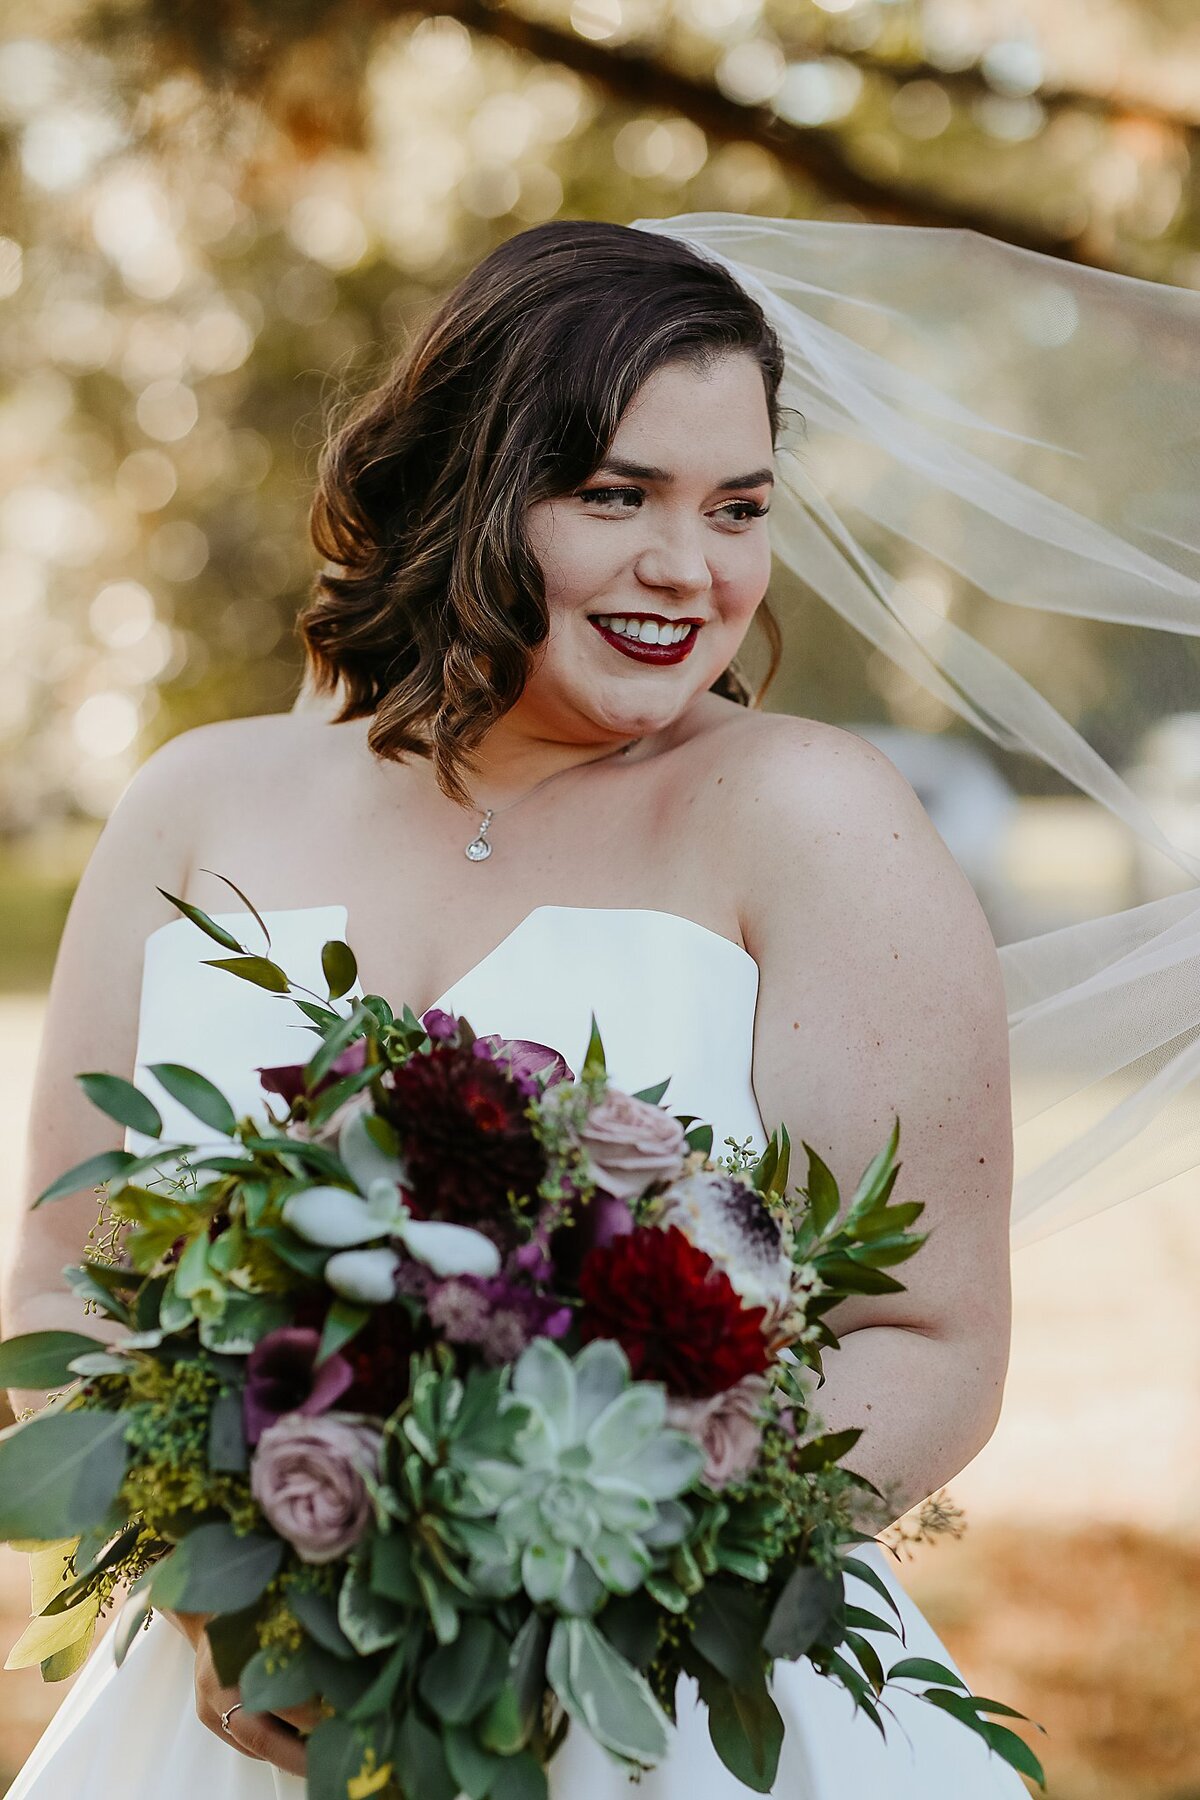 Bride wearing a sheer veil, dark lipstick and a strapless wedding dress with a v neckline holds a bouquet of succulents, burgundy dahlia, lilac roses and eucalyptus.